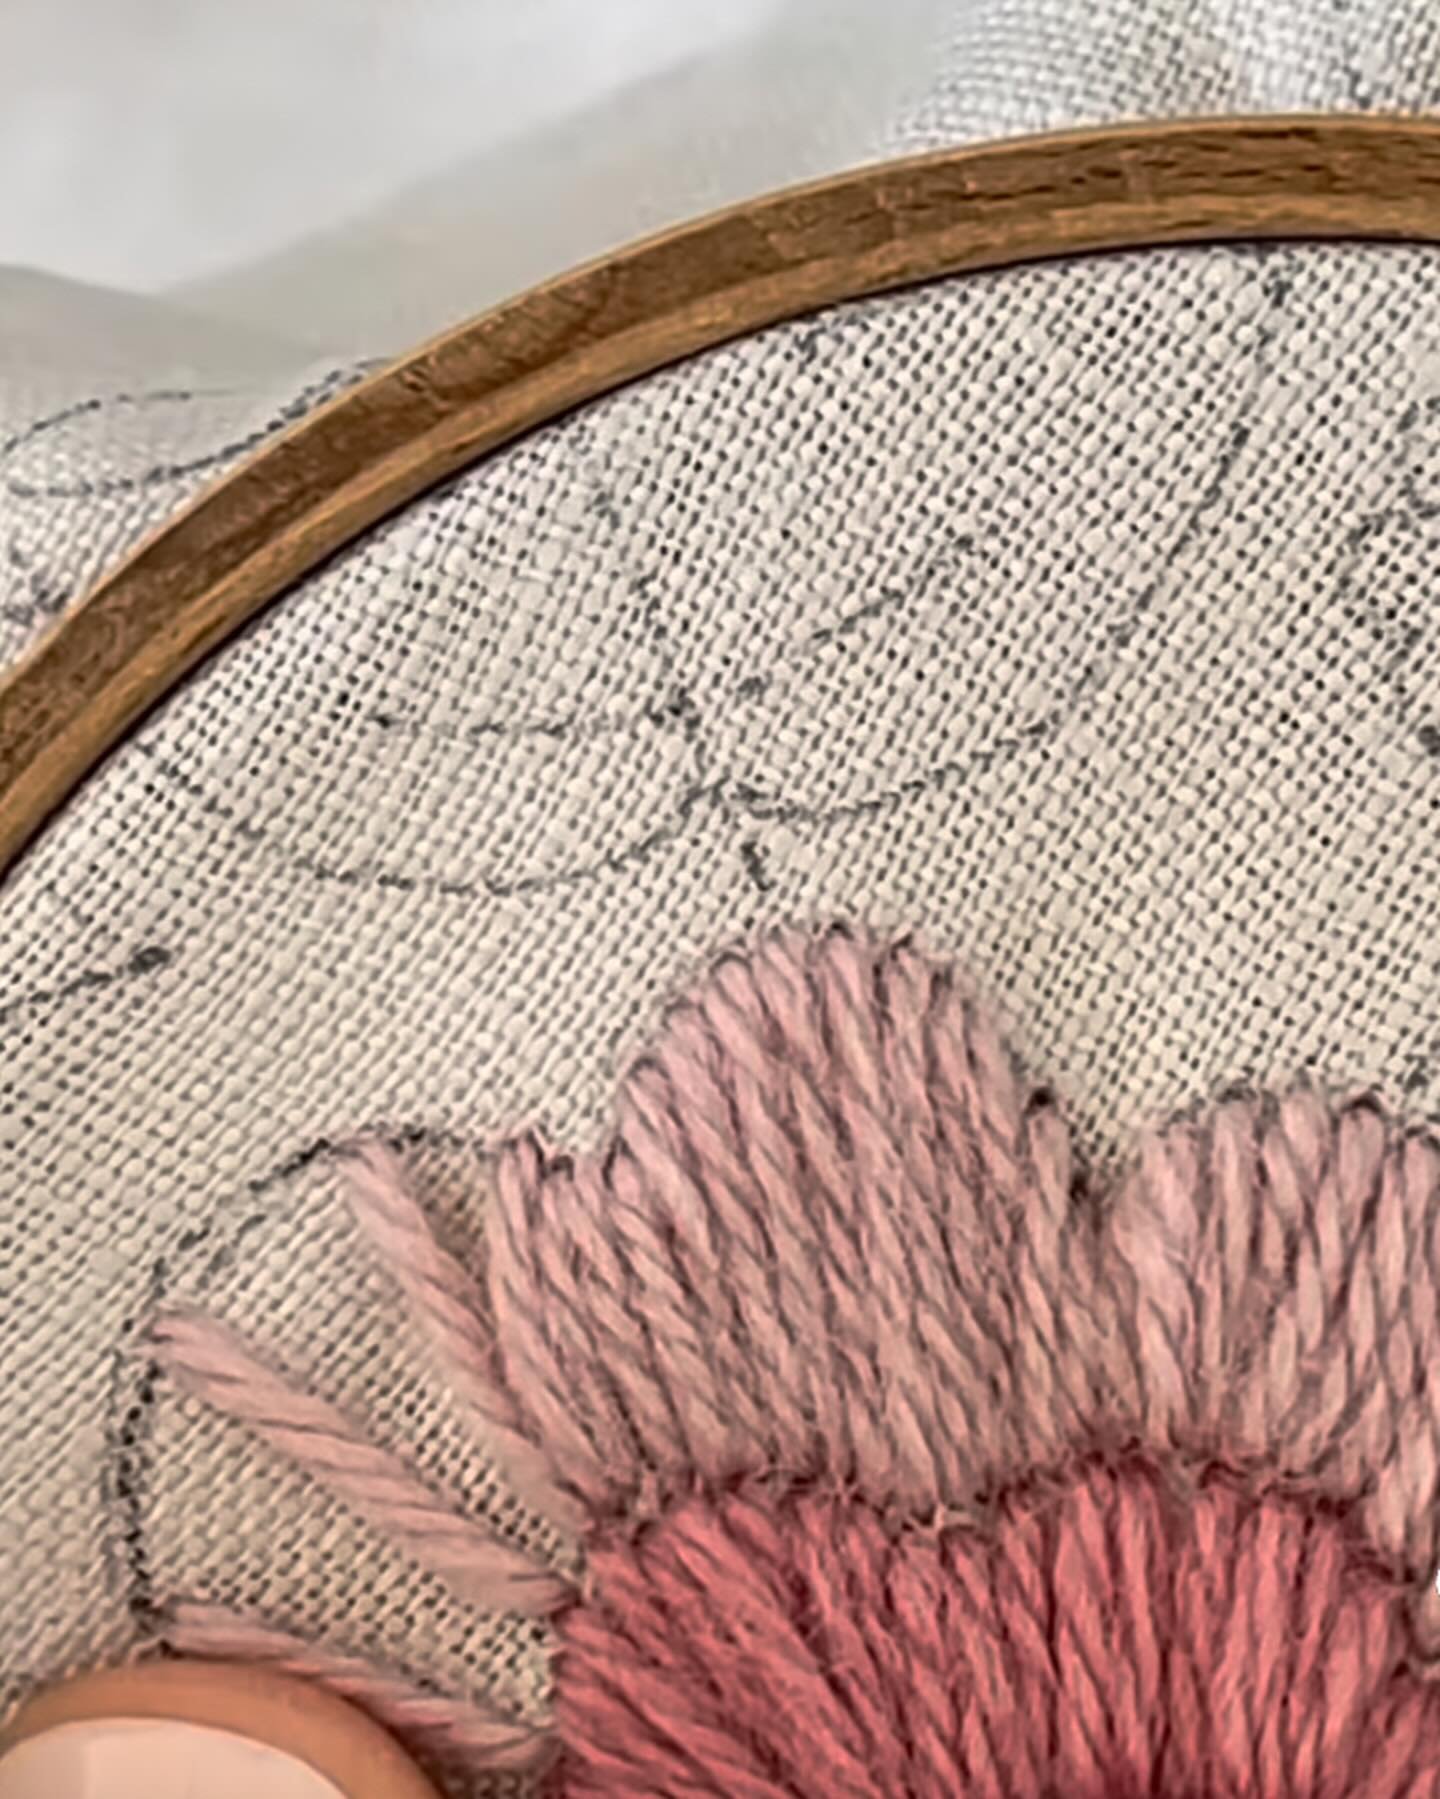 Head over to @stitchingnotes to see her beautiful stitching reel😍 she&rsquo;s working from our #simplystitchedwithwool book by @yumikohiguchi which you can find at the link in our profile.
.
.
#zakkaworkshop #embroidery #handstitching #woolembroider